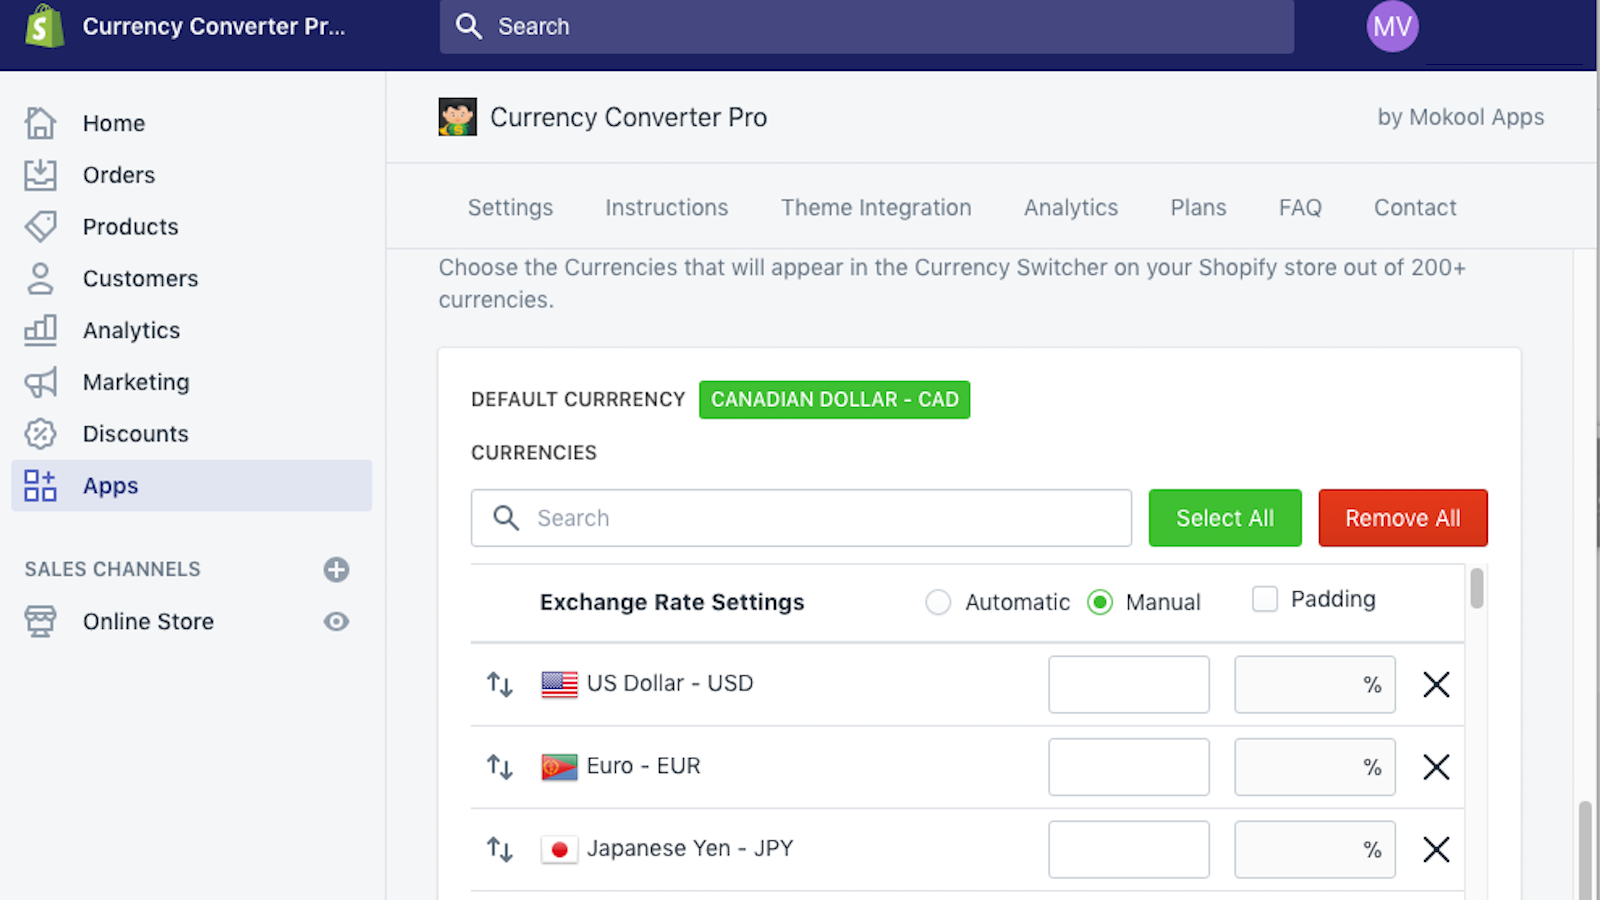 Adding multi-currencies to reach more customers and more money